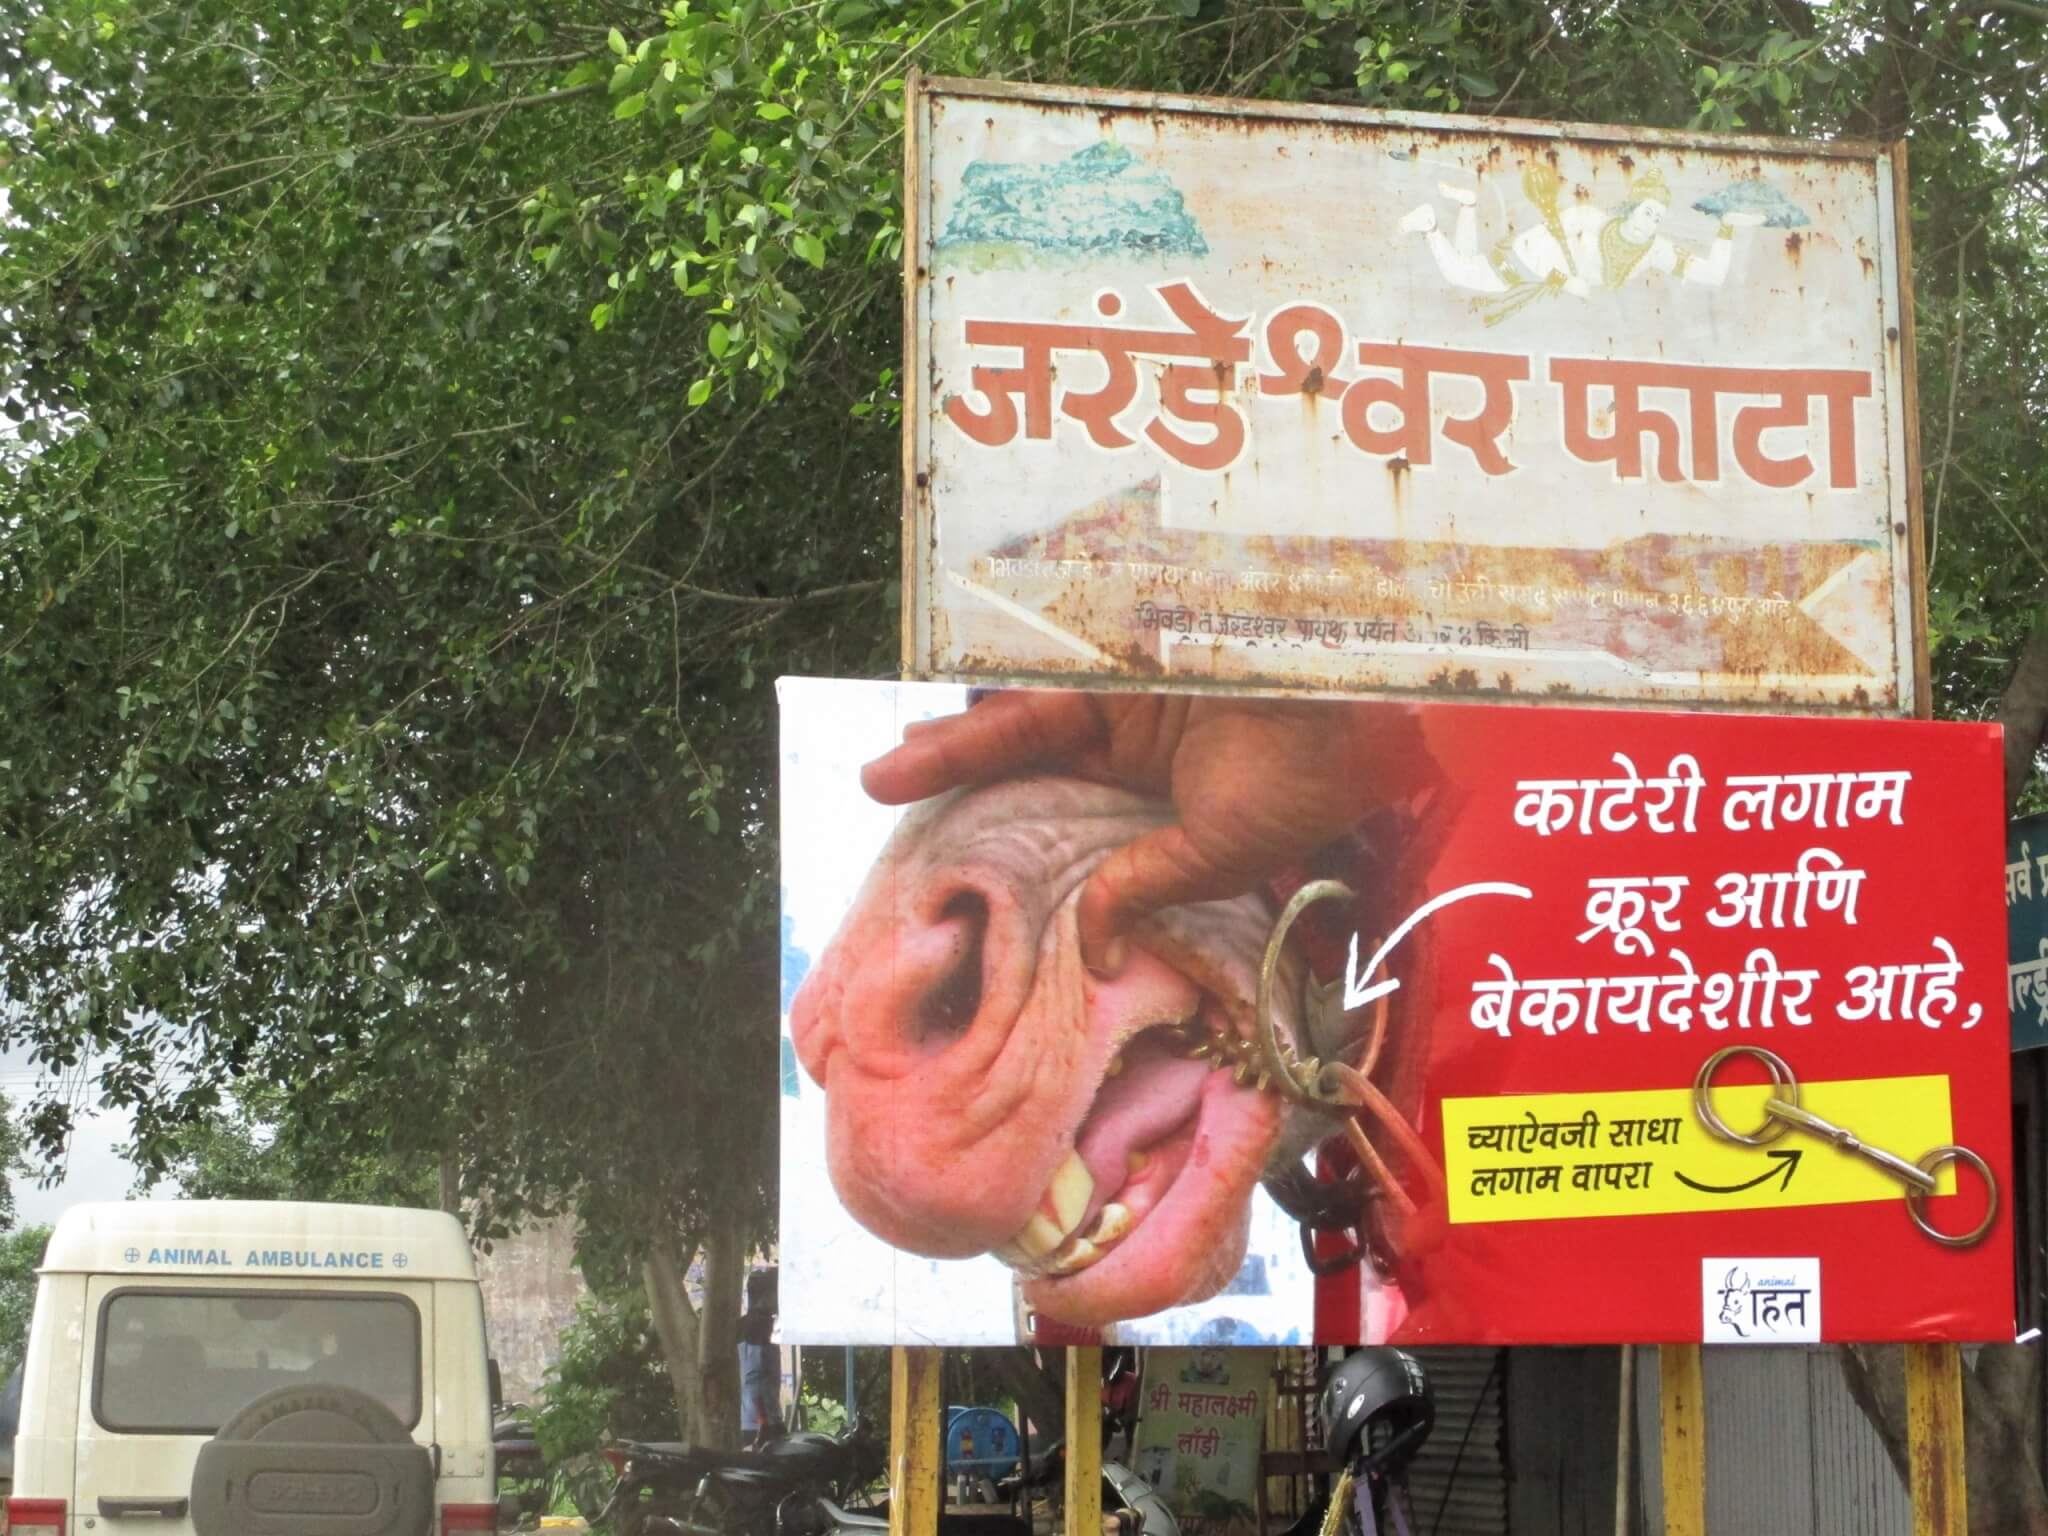 A billboard in Maharashtra condemns the use of spiked bits.